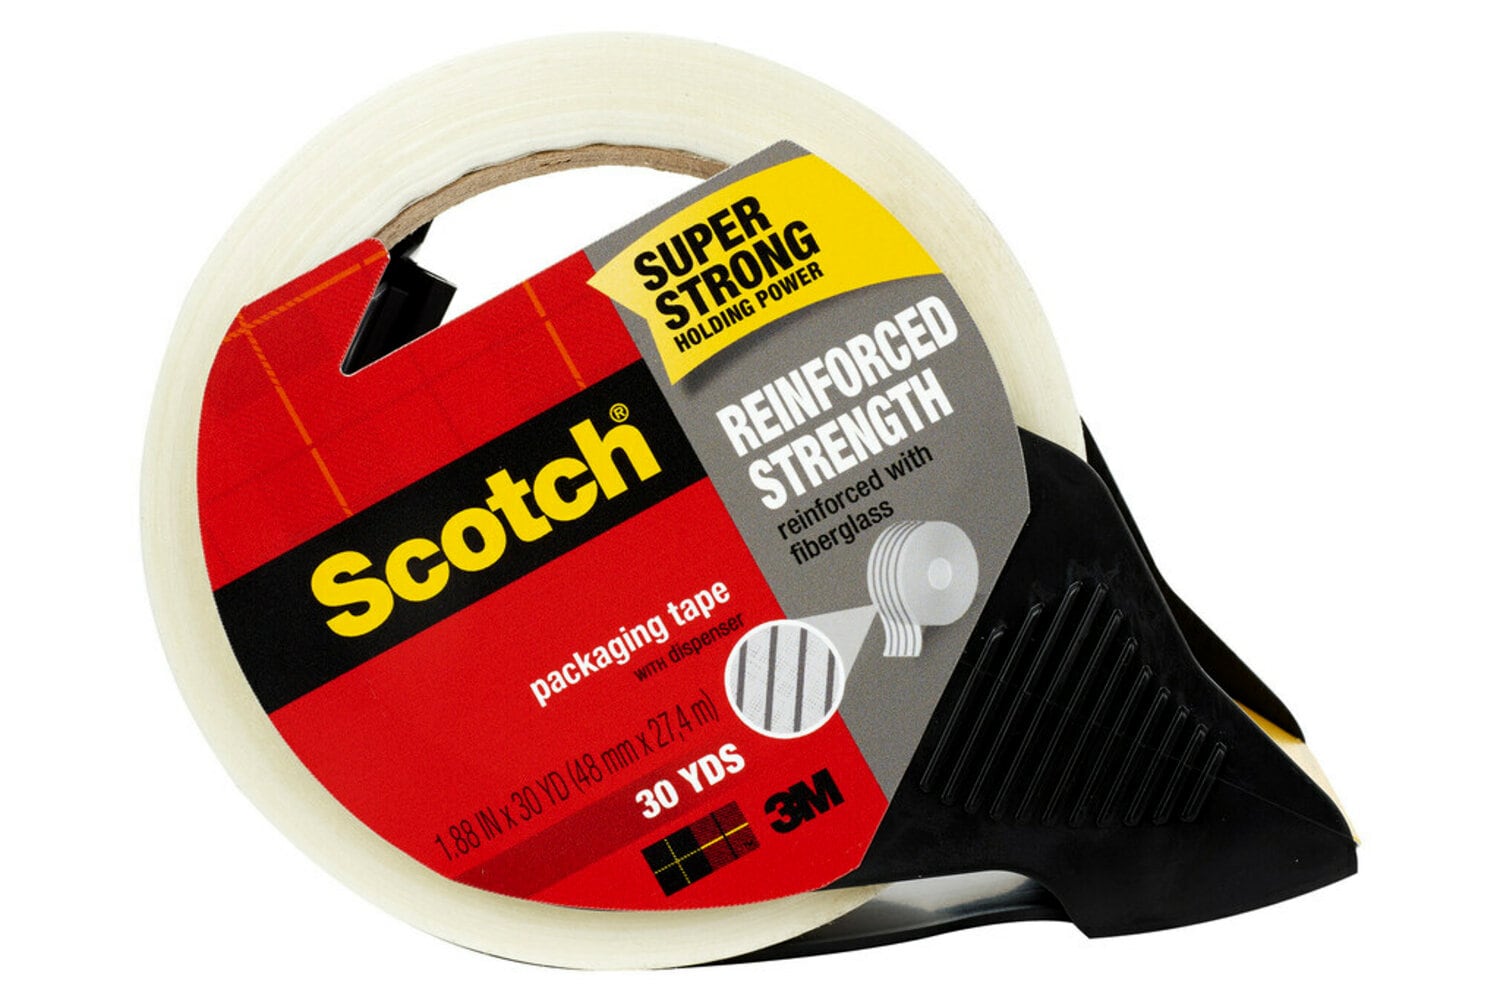 https://www.e-aircraftsupply.com/ItemImages/95/1951035E_scotchr-reinforced-strength-strapping-packaging-tape-8950-30-rd-dc-1-88-in-x-30-yd.jpg